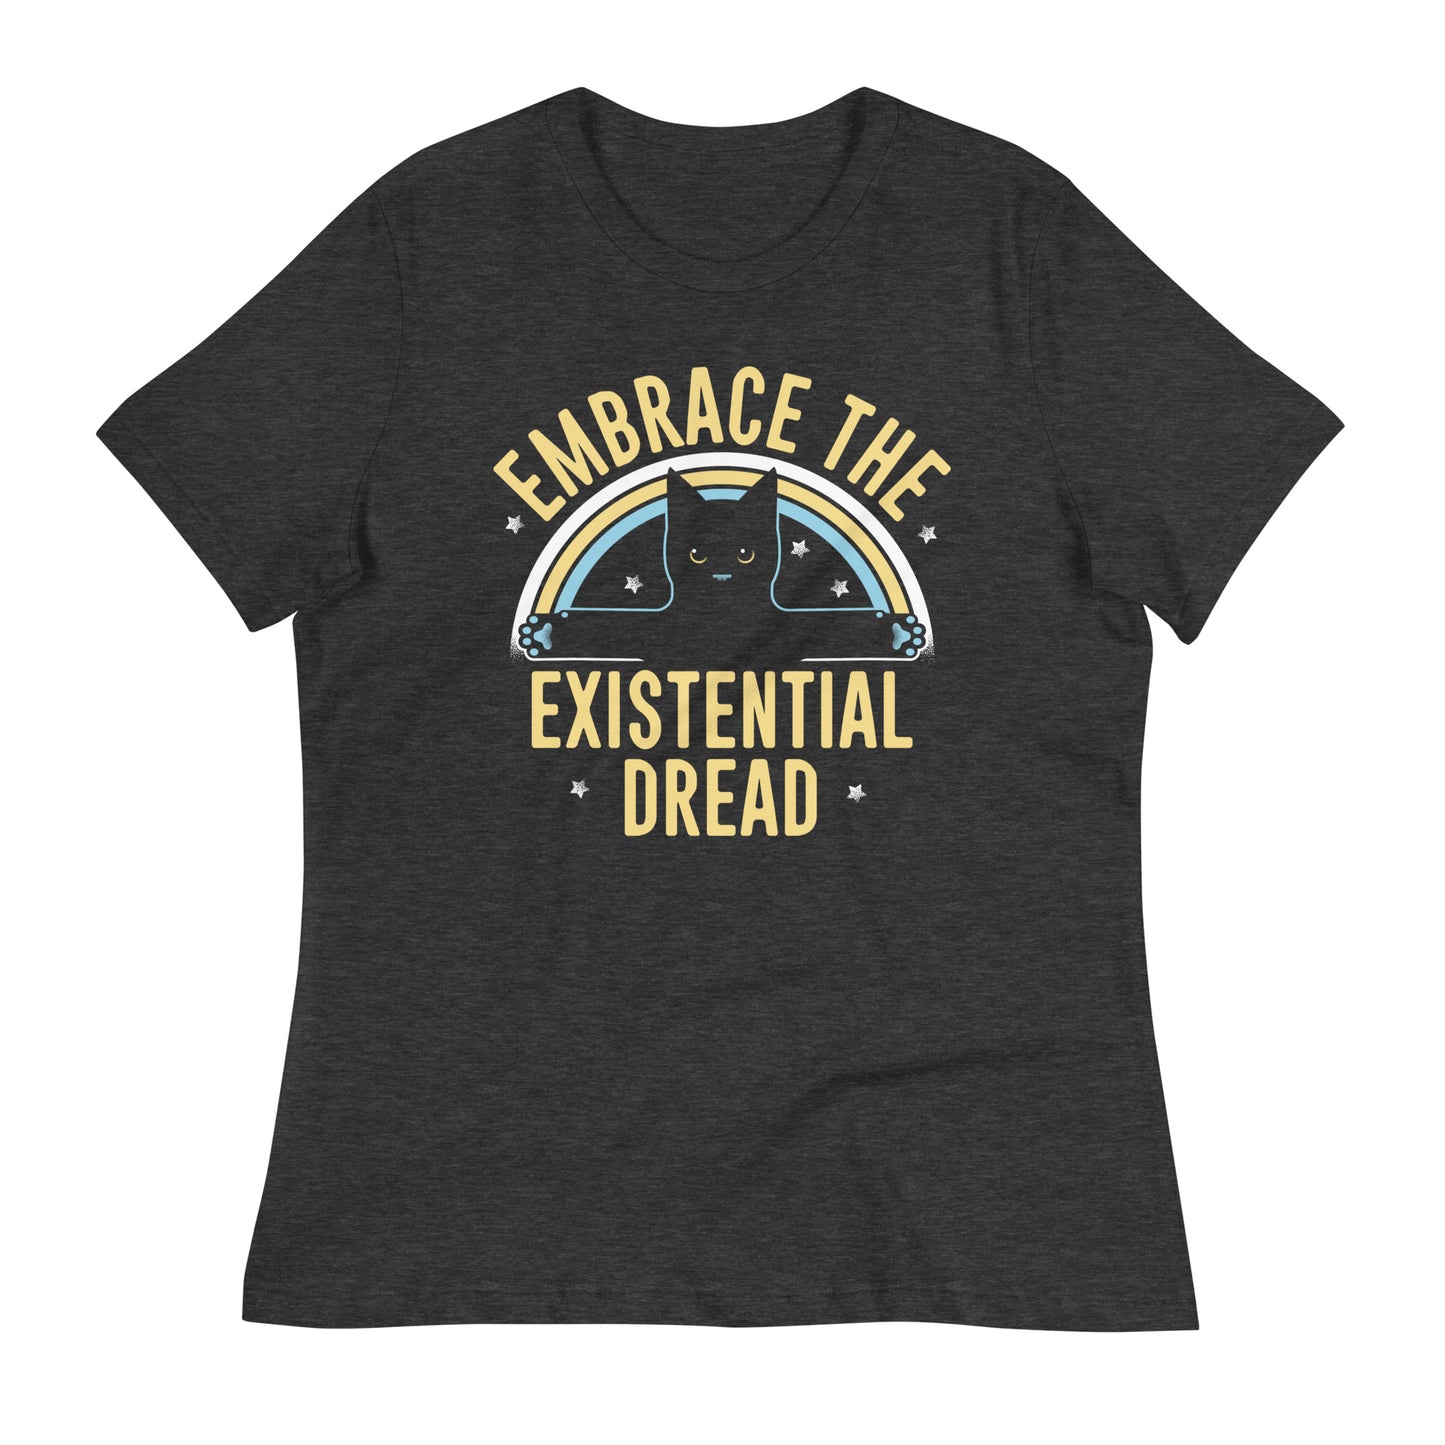 Embrace The Existential Dread Women's Signature Tee